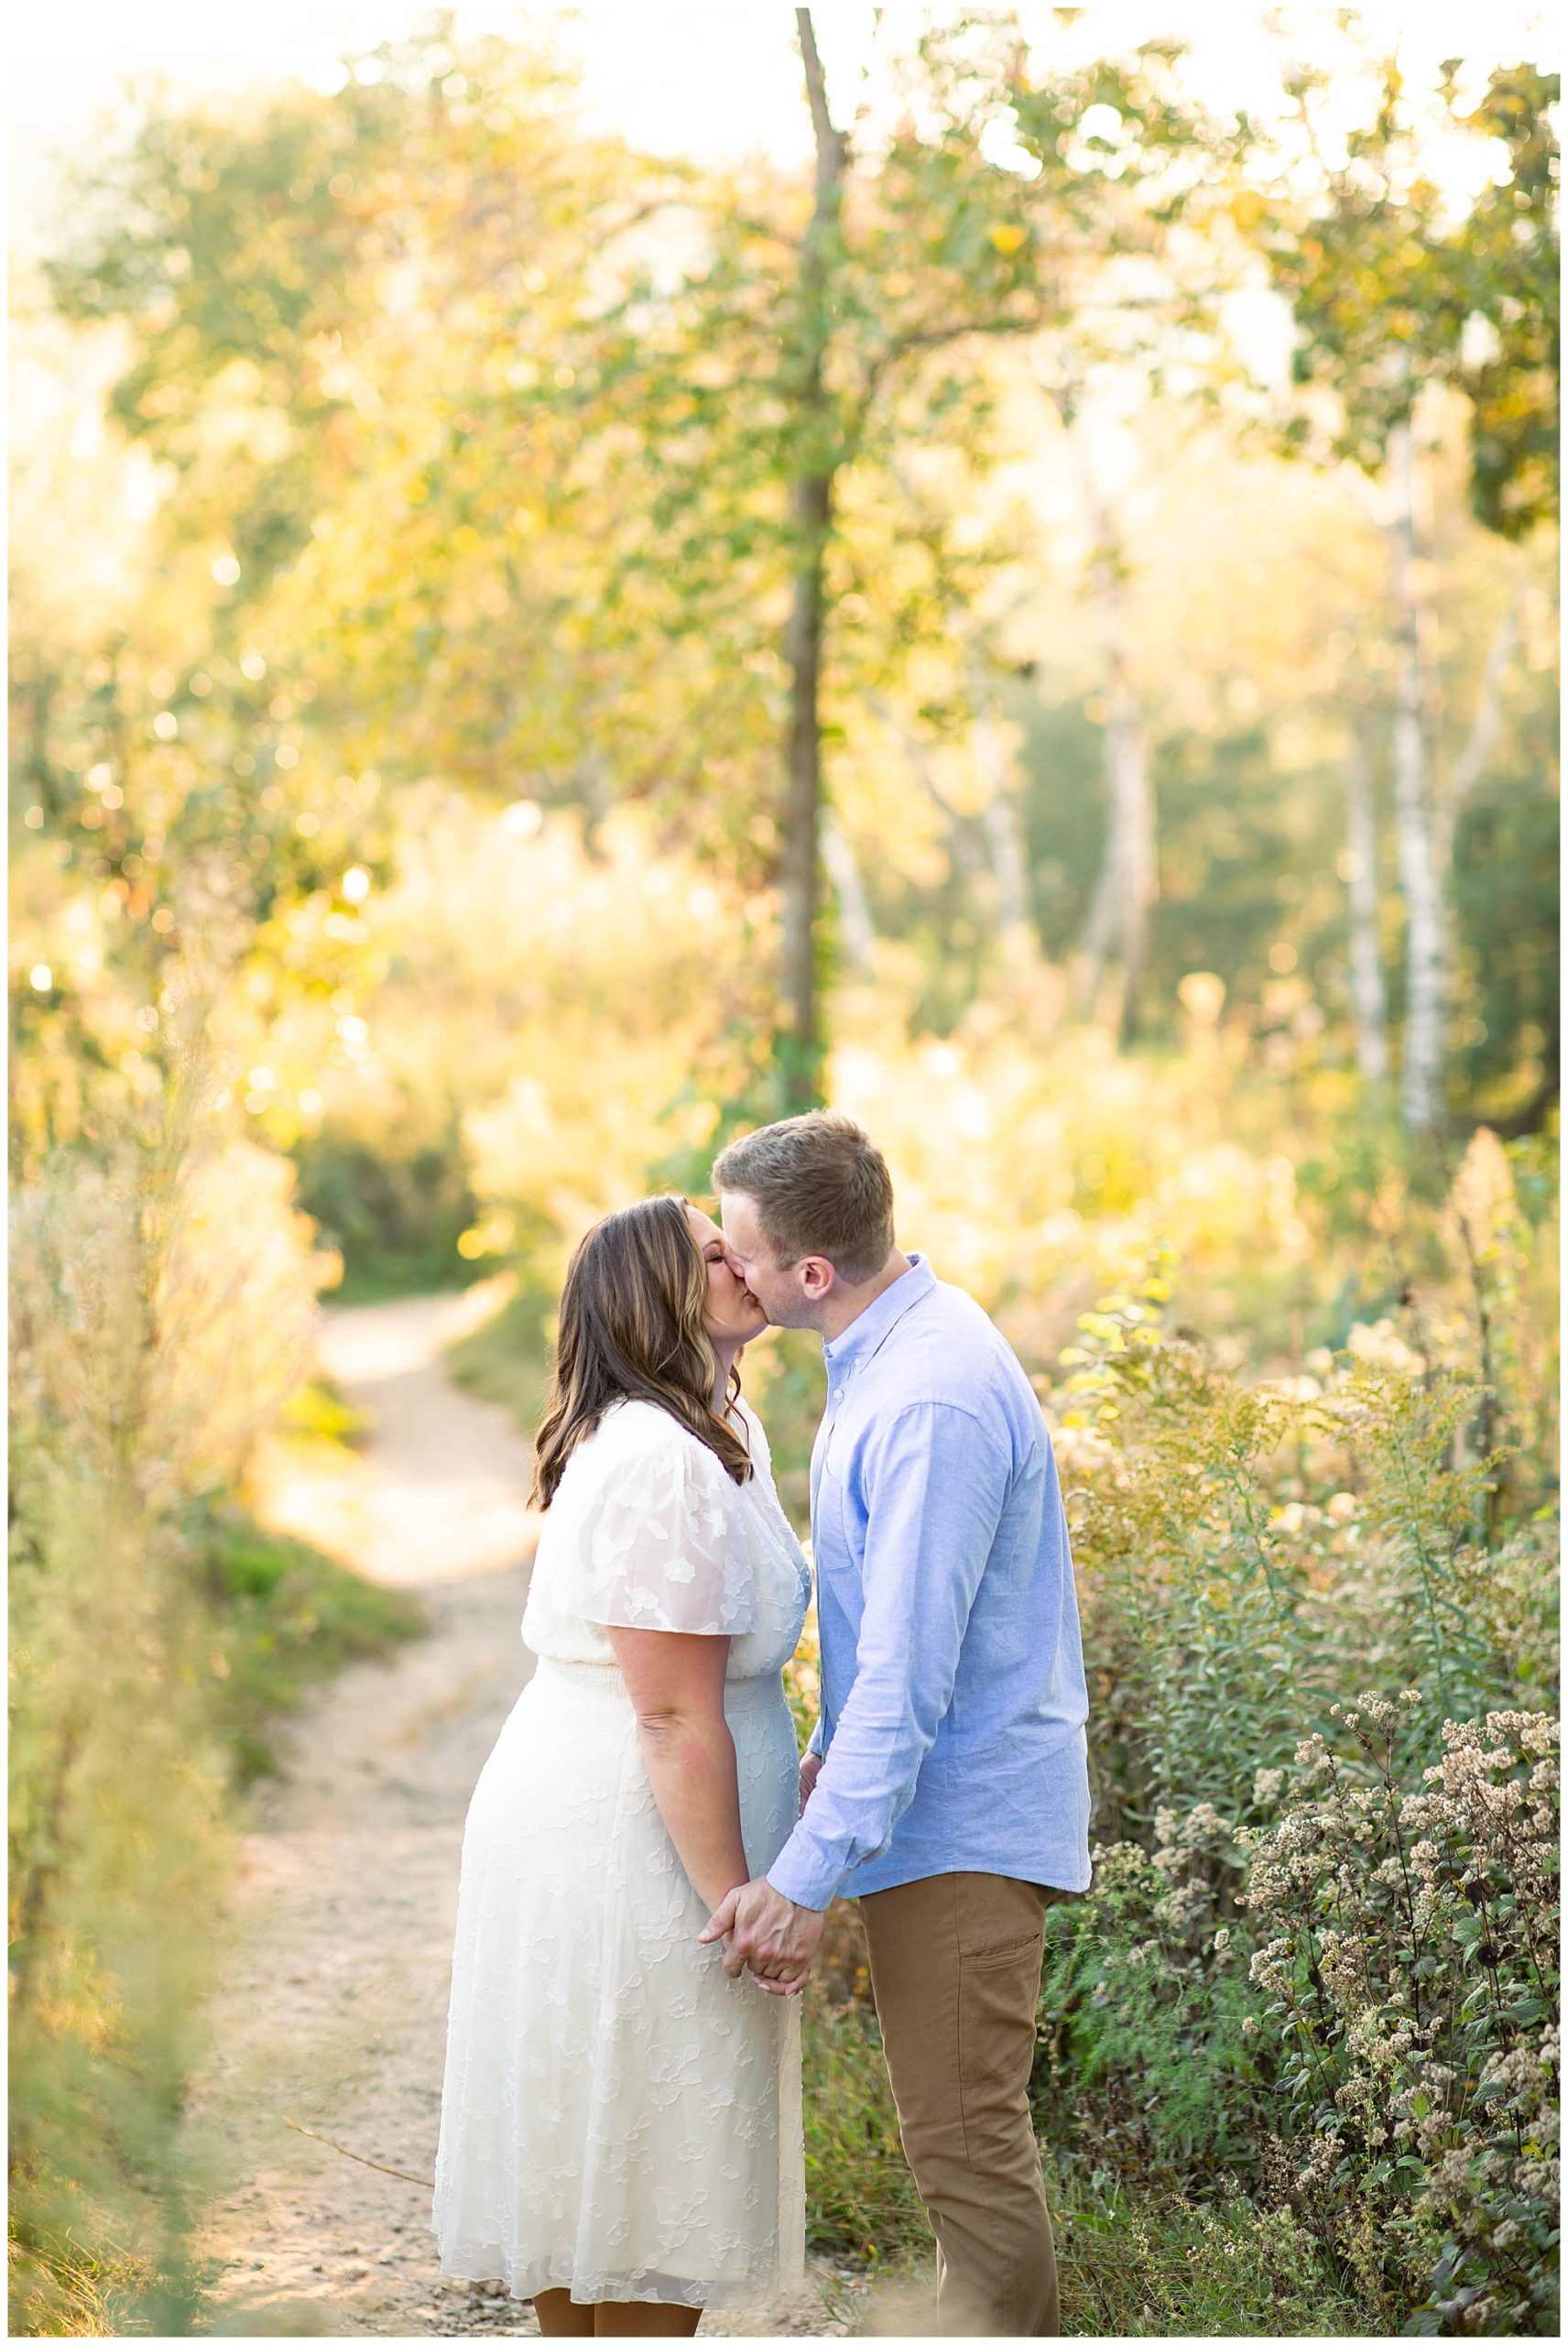 Indian Lake Engagement Session with classic white dress and blue button up